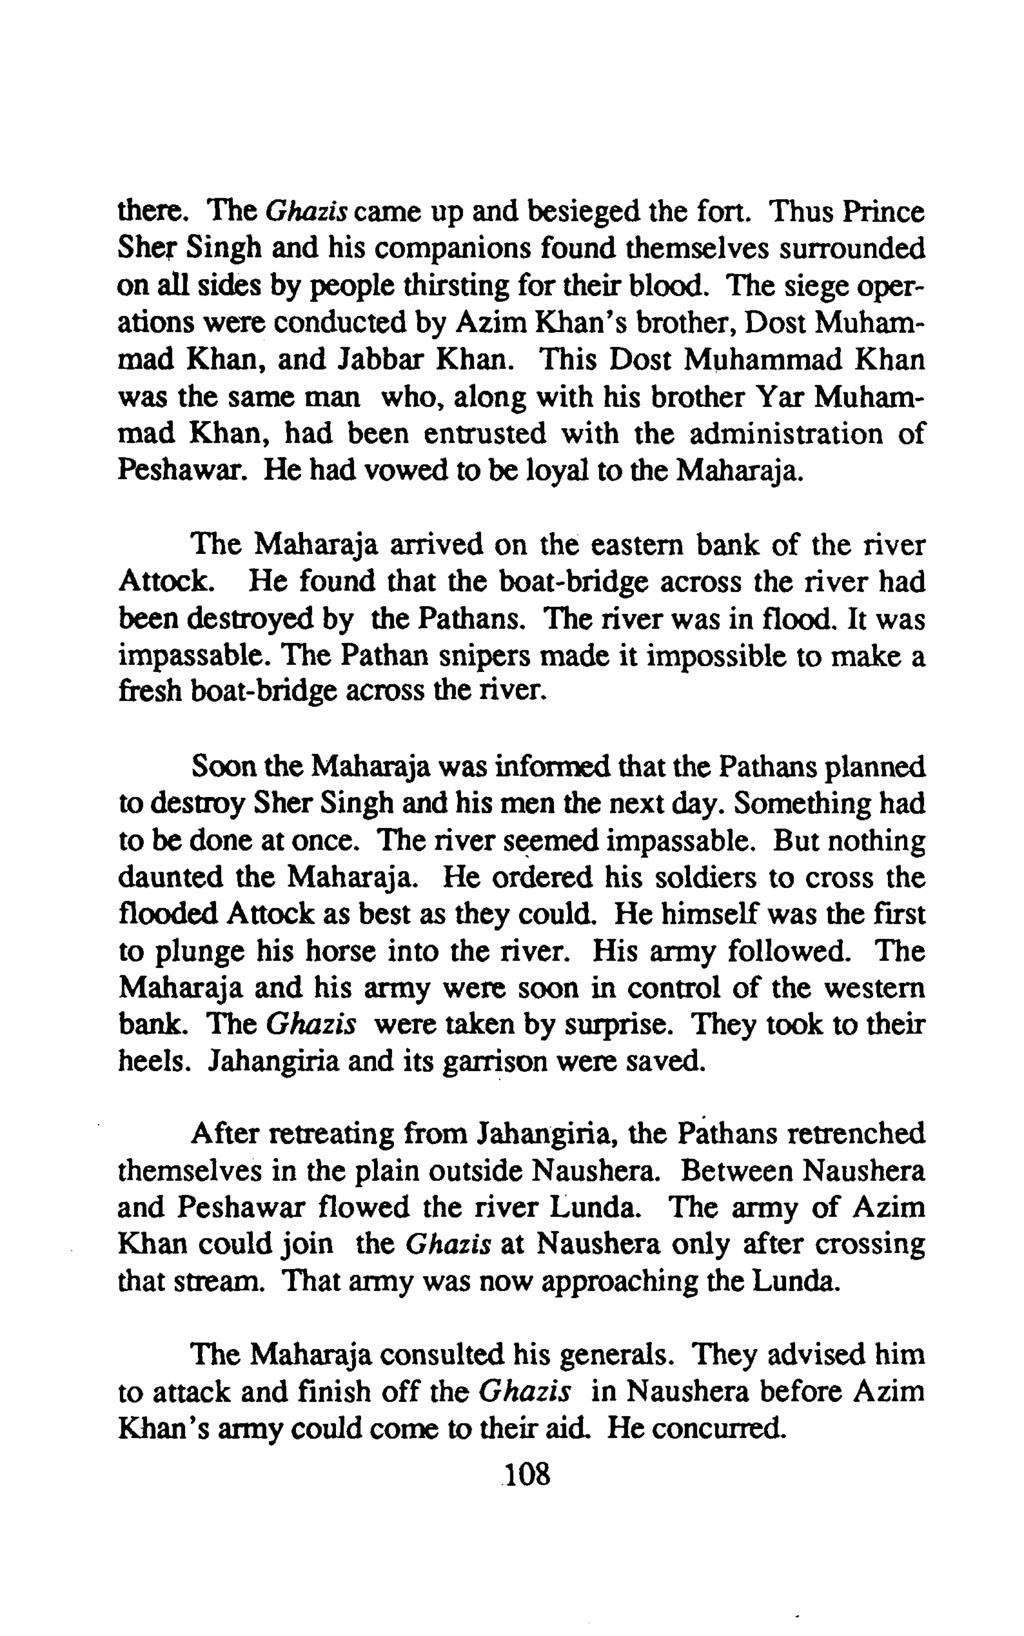 there. The Ghazis came up and besieged the fon. Thus Prince Sher Singh and his companions found themselves surrounded on all sides by people thirsting for their blood.